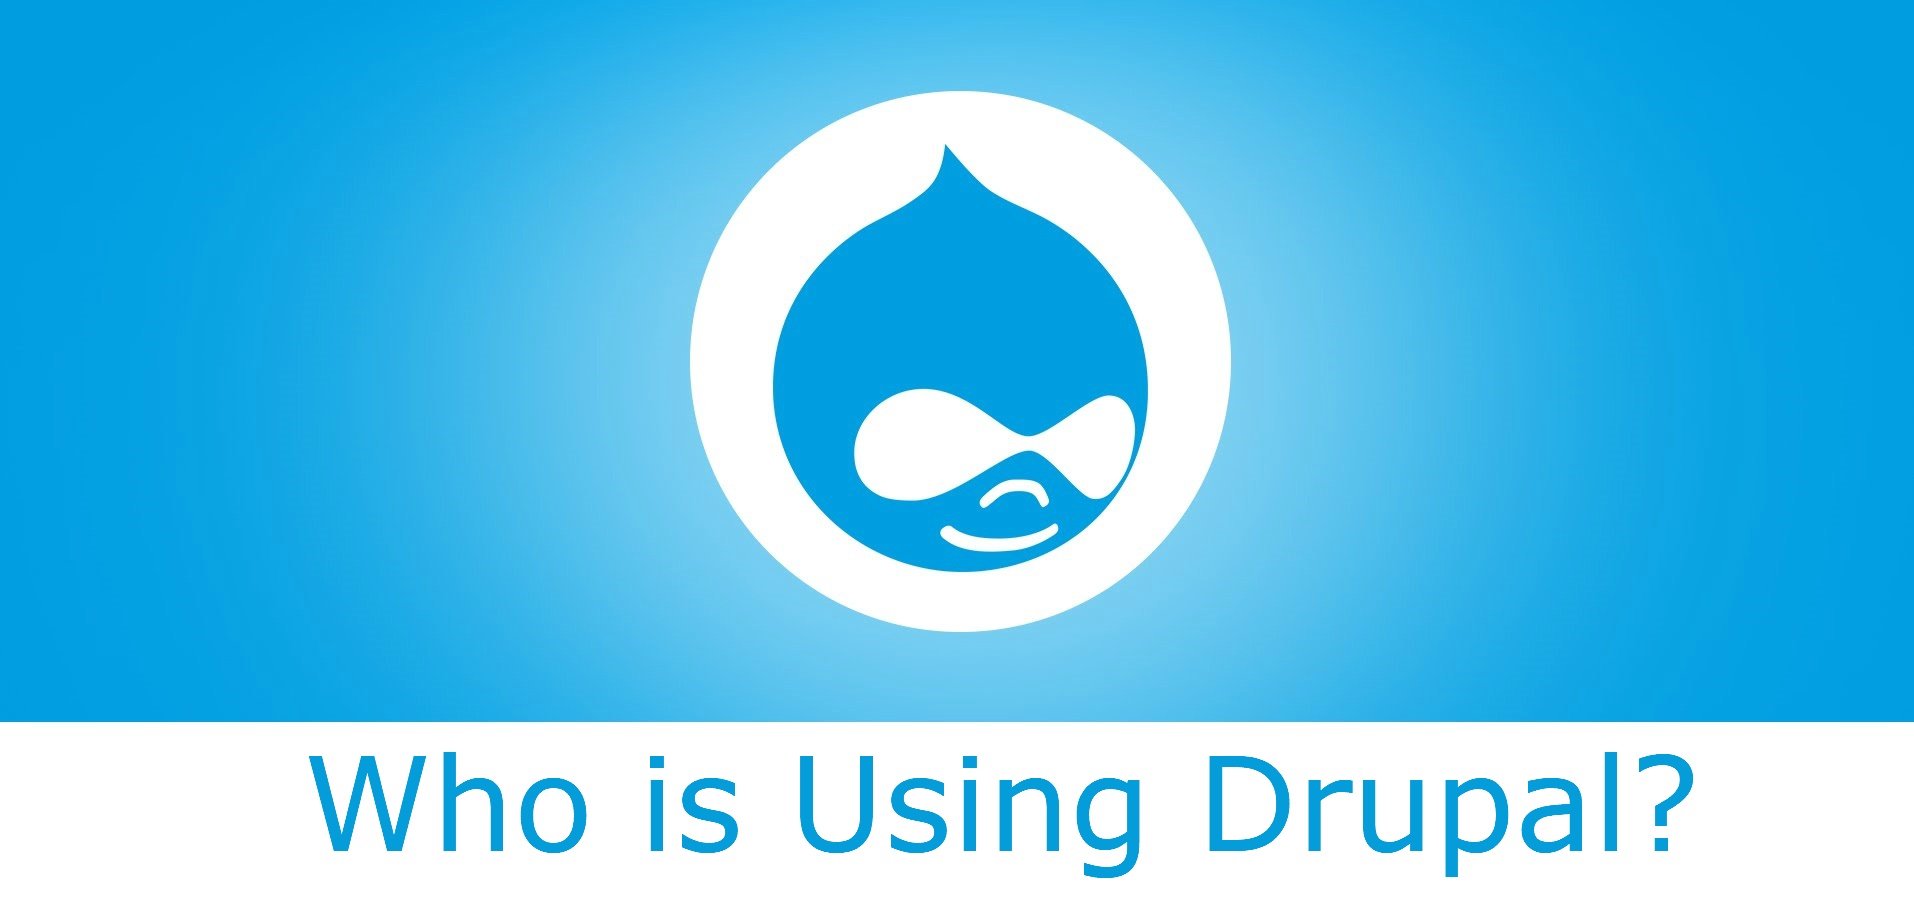 Who is Using Drupal?